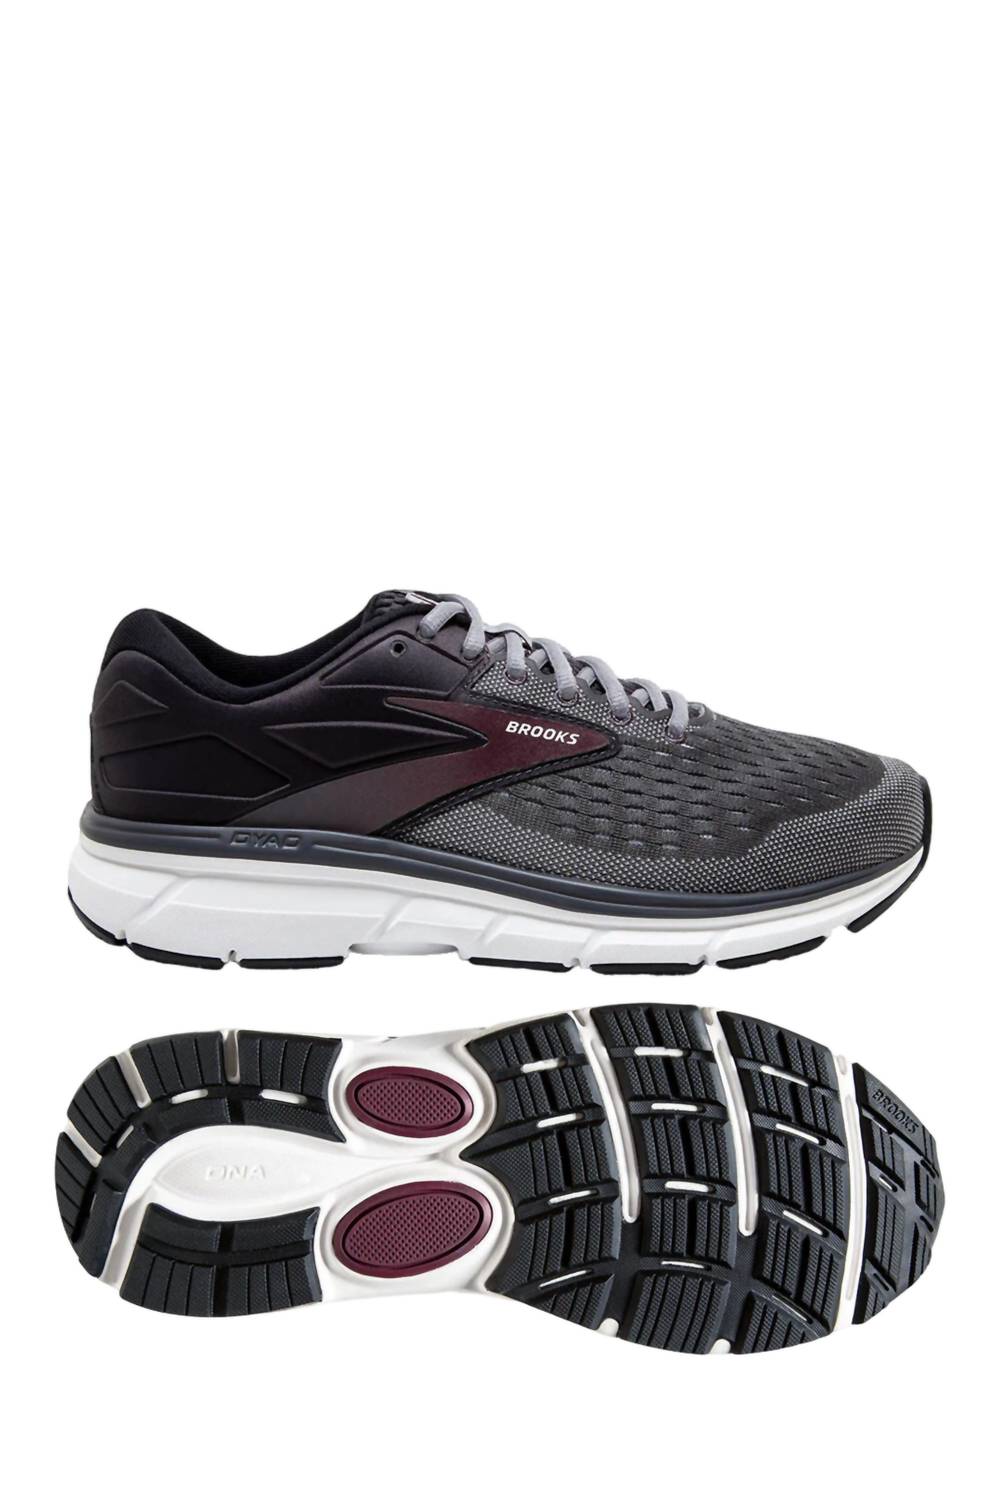 Brooks Men's Dyad 11 Running Shoes - D/medium Width In Blackened Pearl/alloy/red In Multi